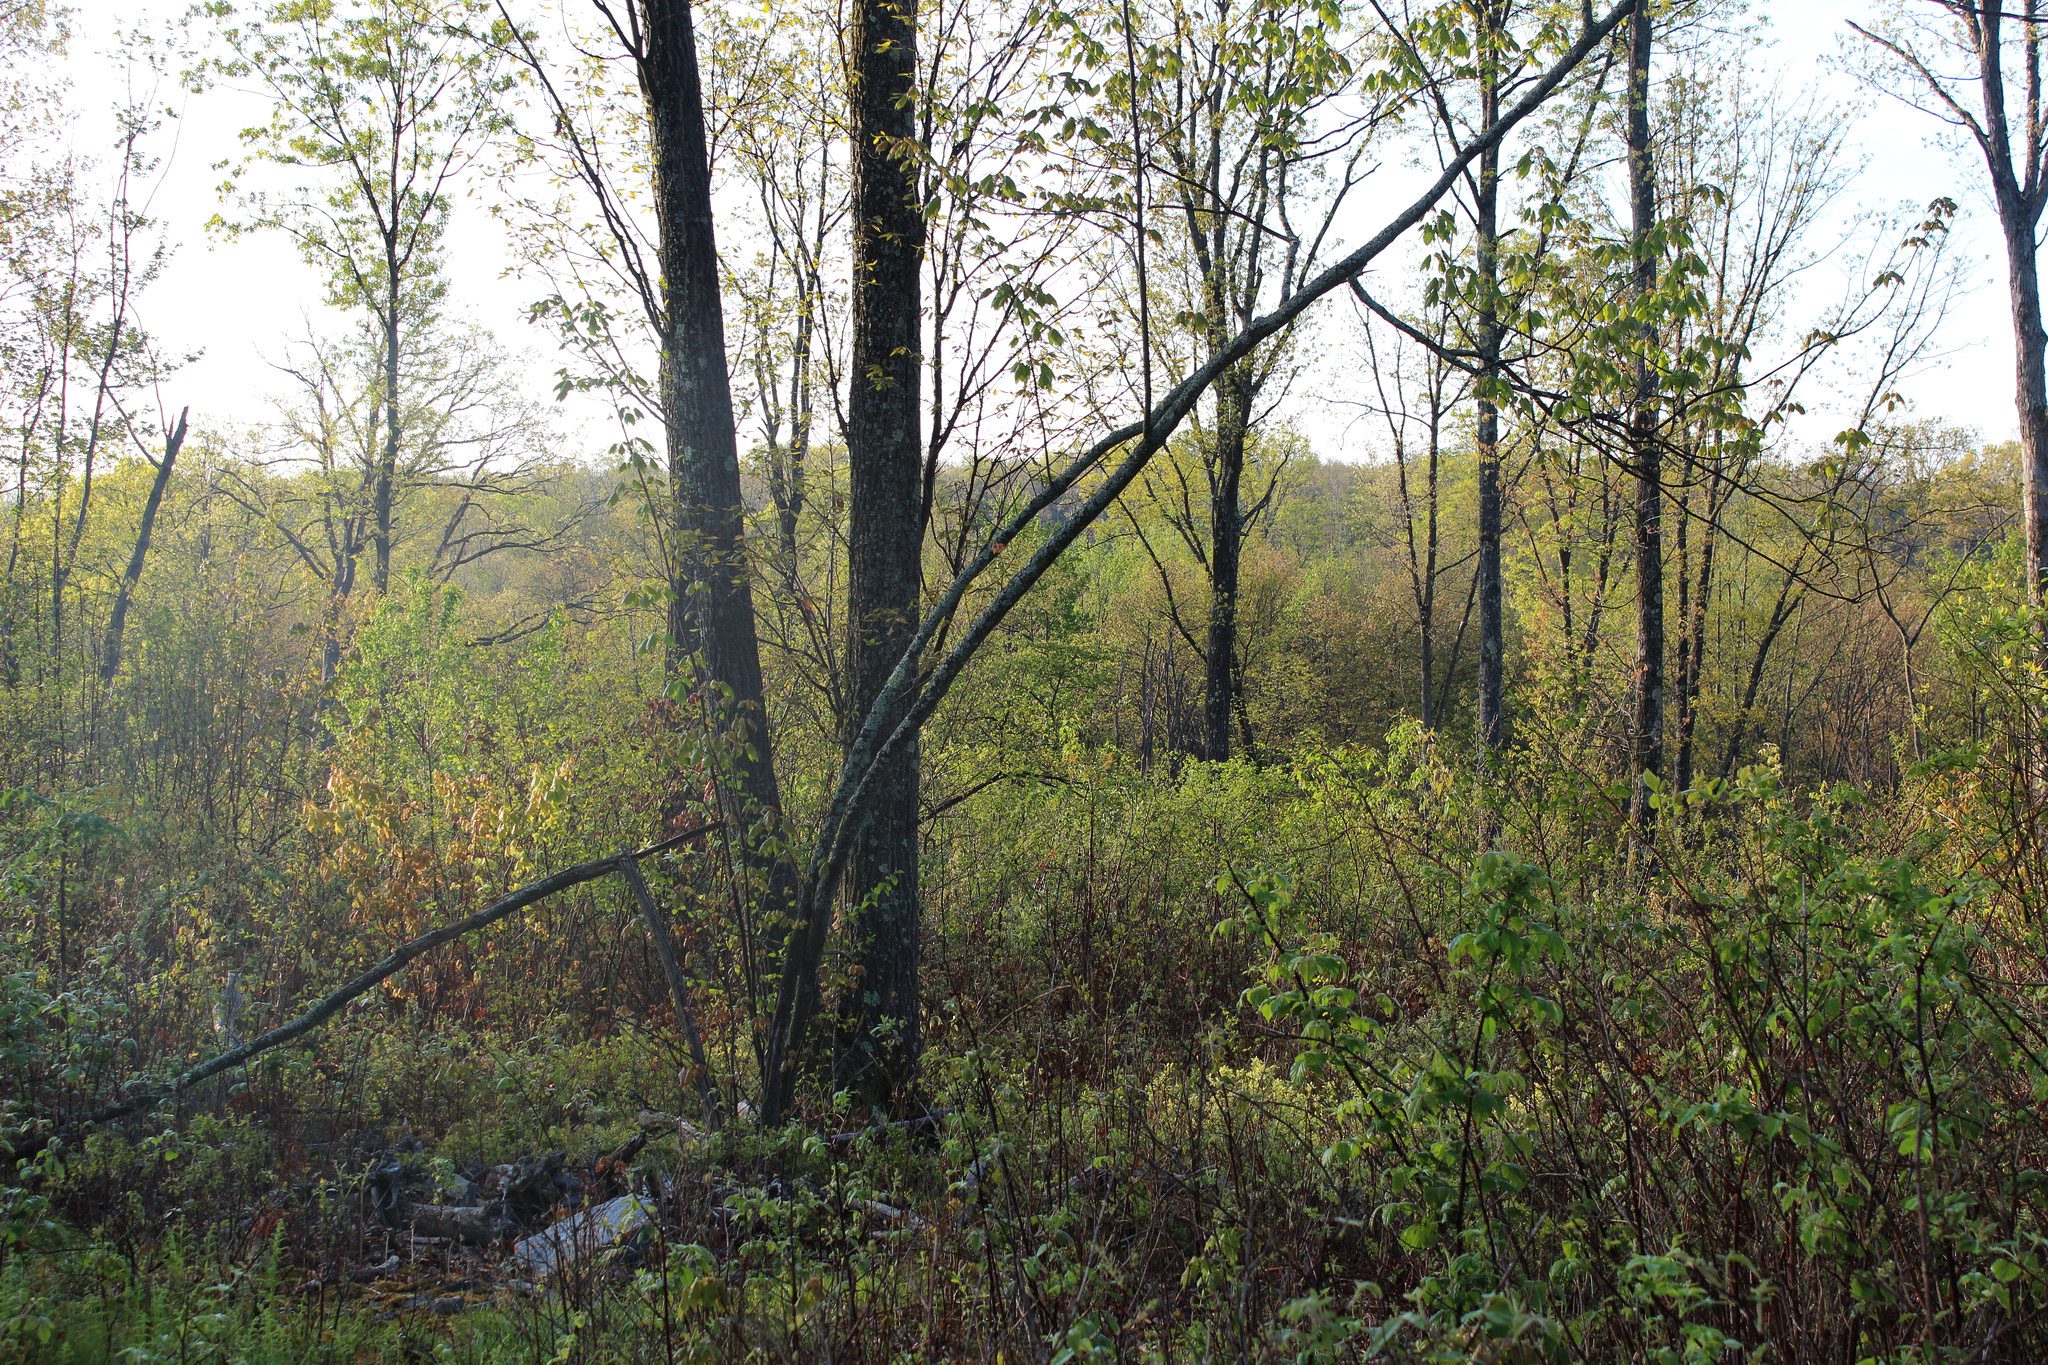 Clumps of trees among early successional forests provide optimal habitat for the golden-winged warbler. Credit: Justin Fritscher, NRCS.